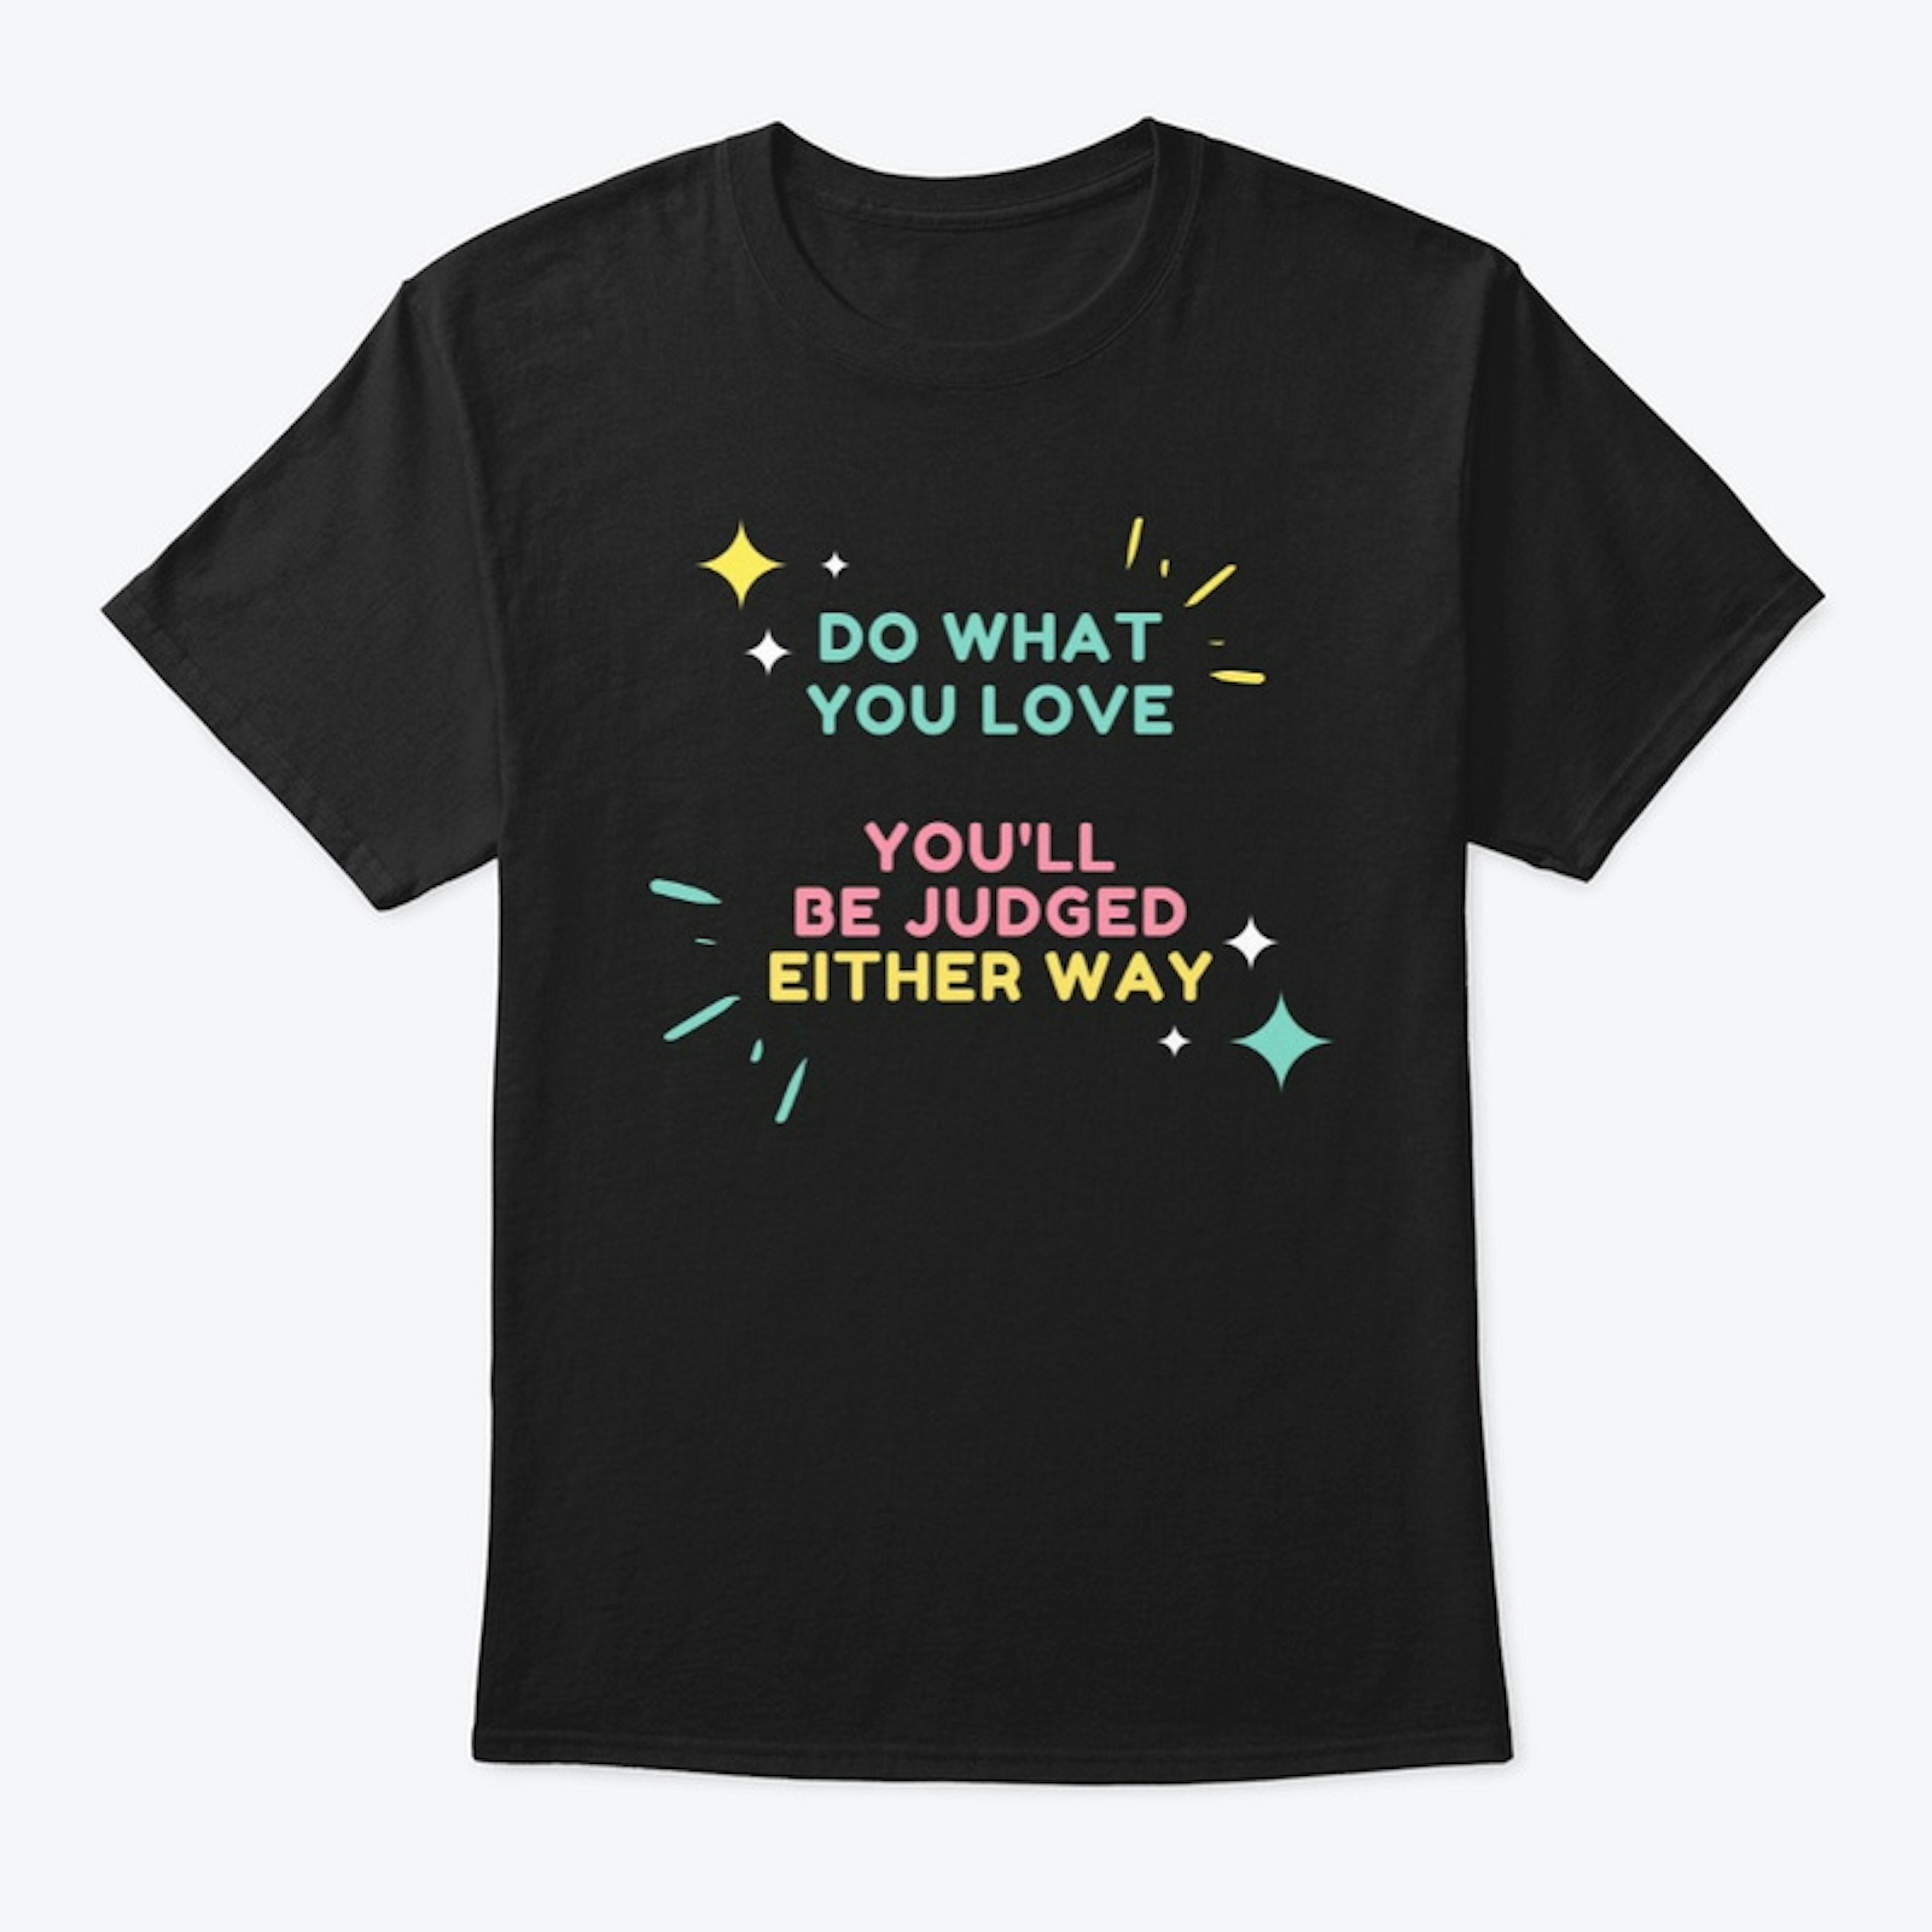 Do what you love quote T shirt